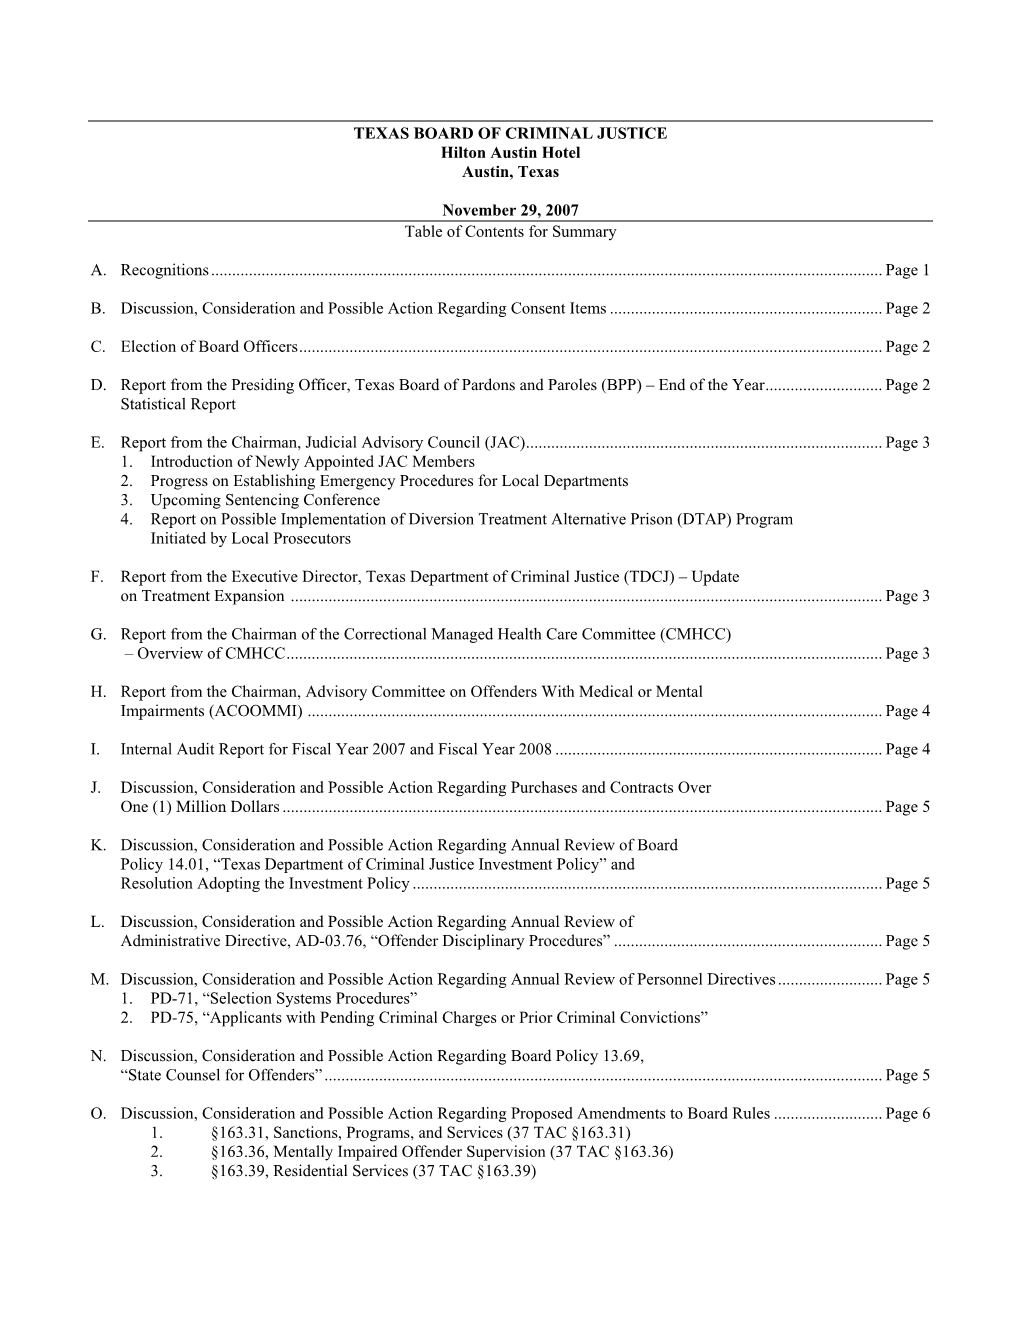 November 29, 2007 Table of Contents for Summary